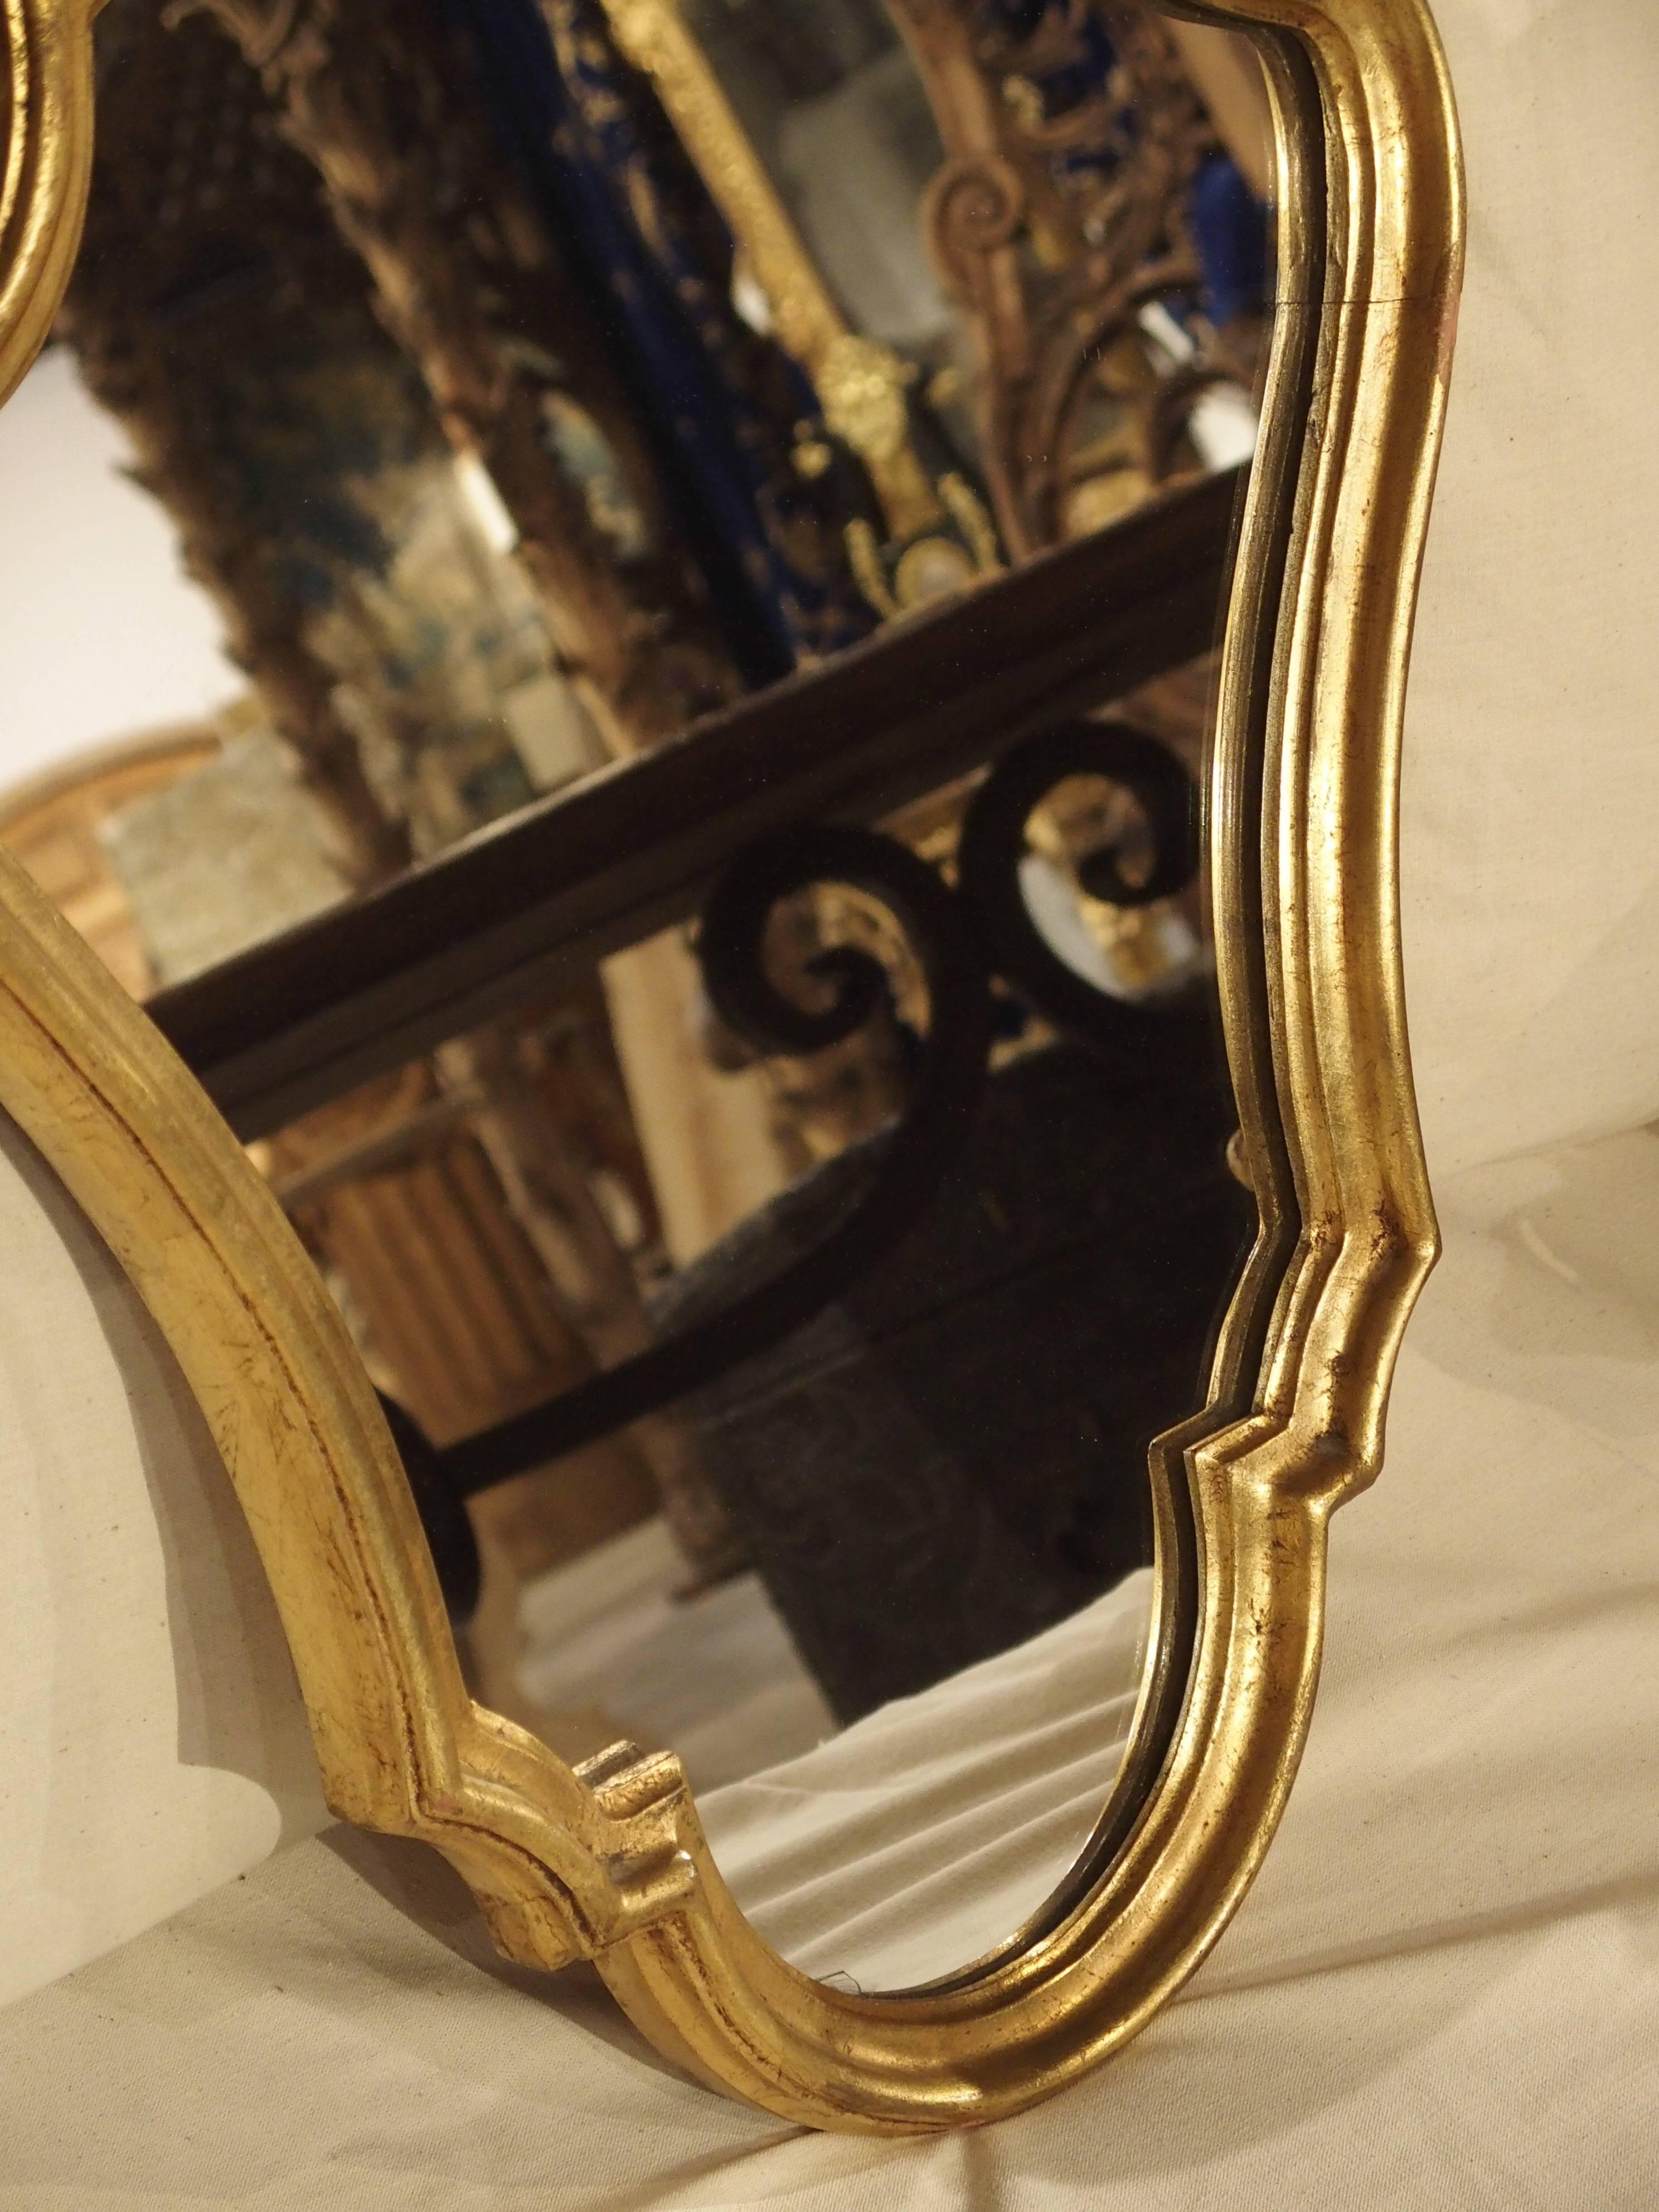 This vintage, shaped, giltwood mirror from France has interesting lines throughout. Right angles are paired with curves and the shape is trapezoidal with the narrow part at the bottom. With only one motif of a shell and foliage at the top, this